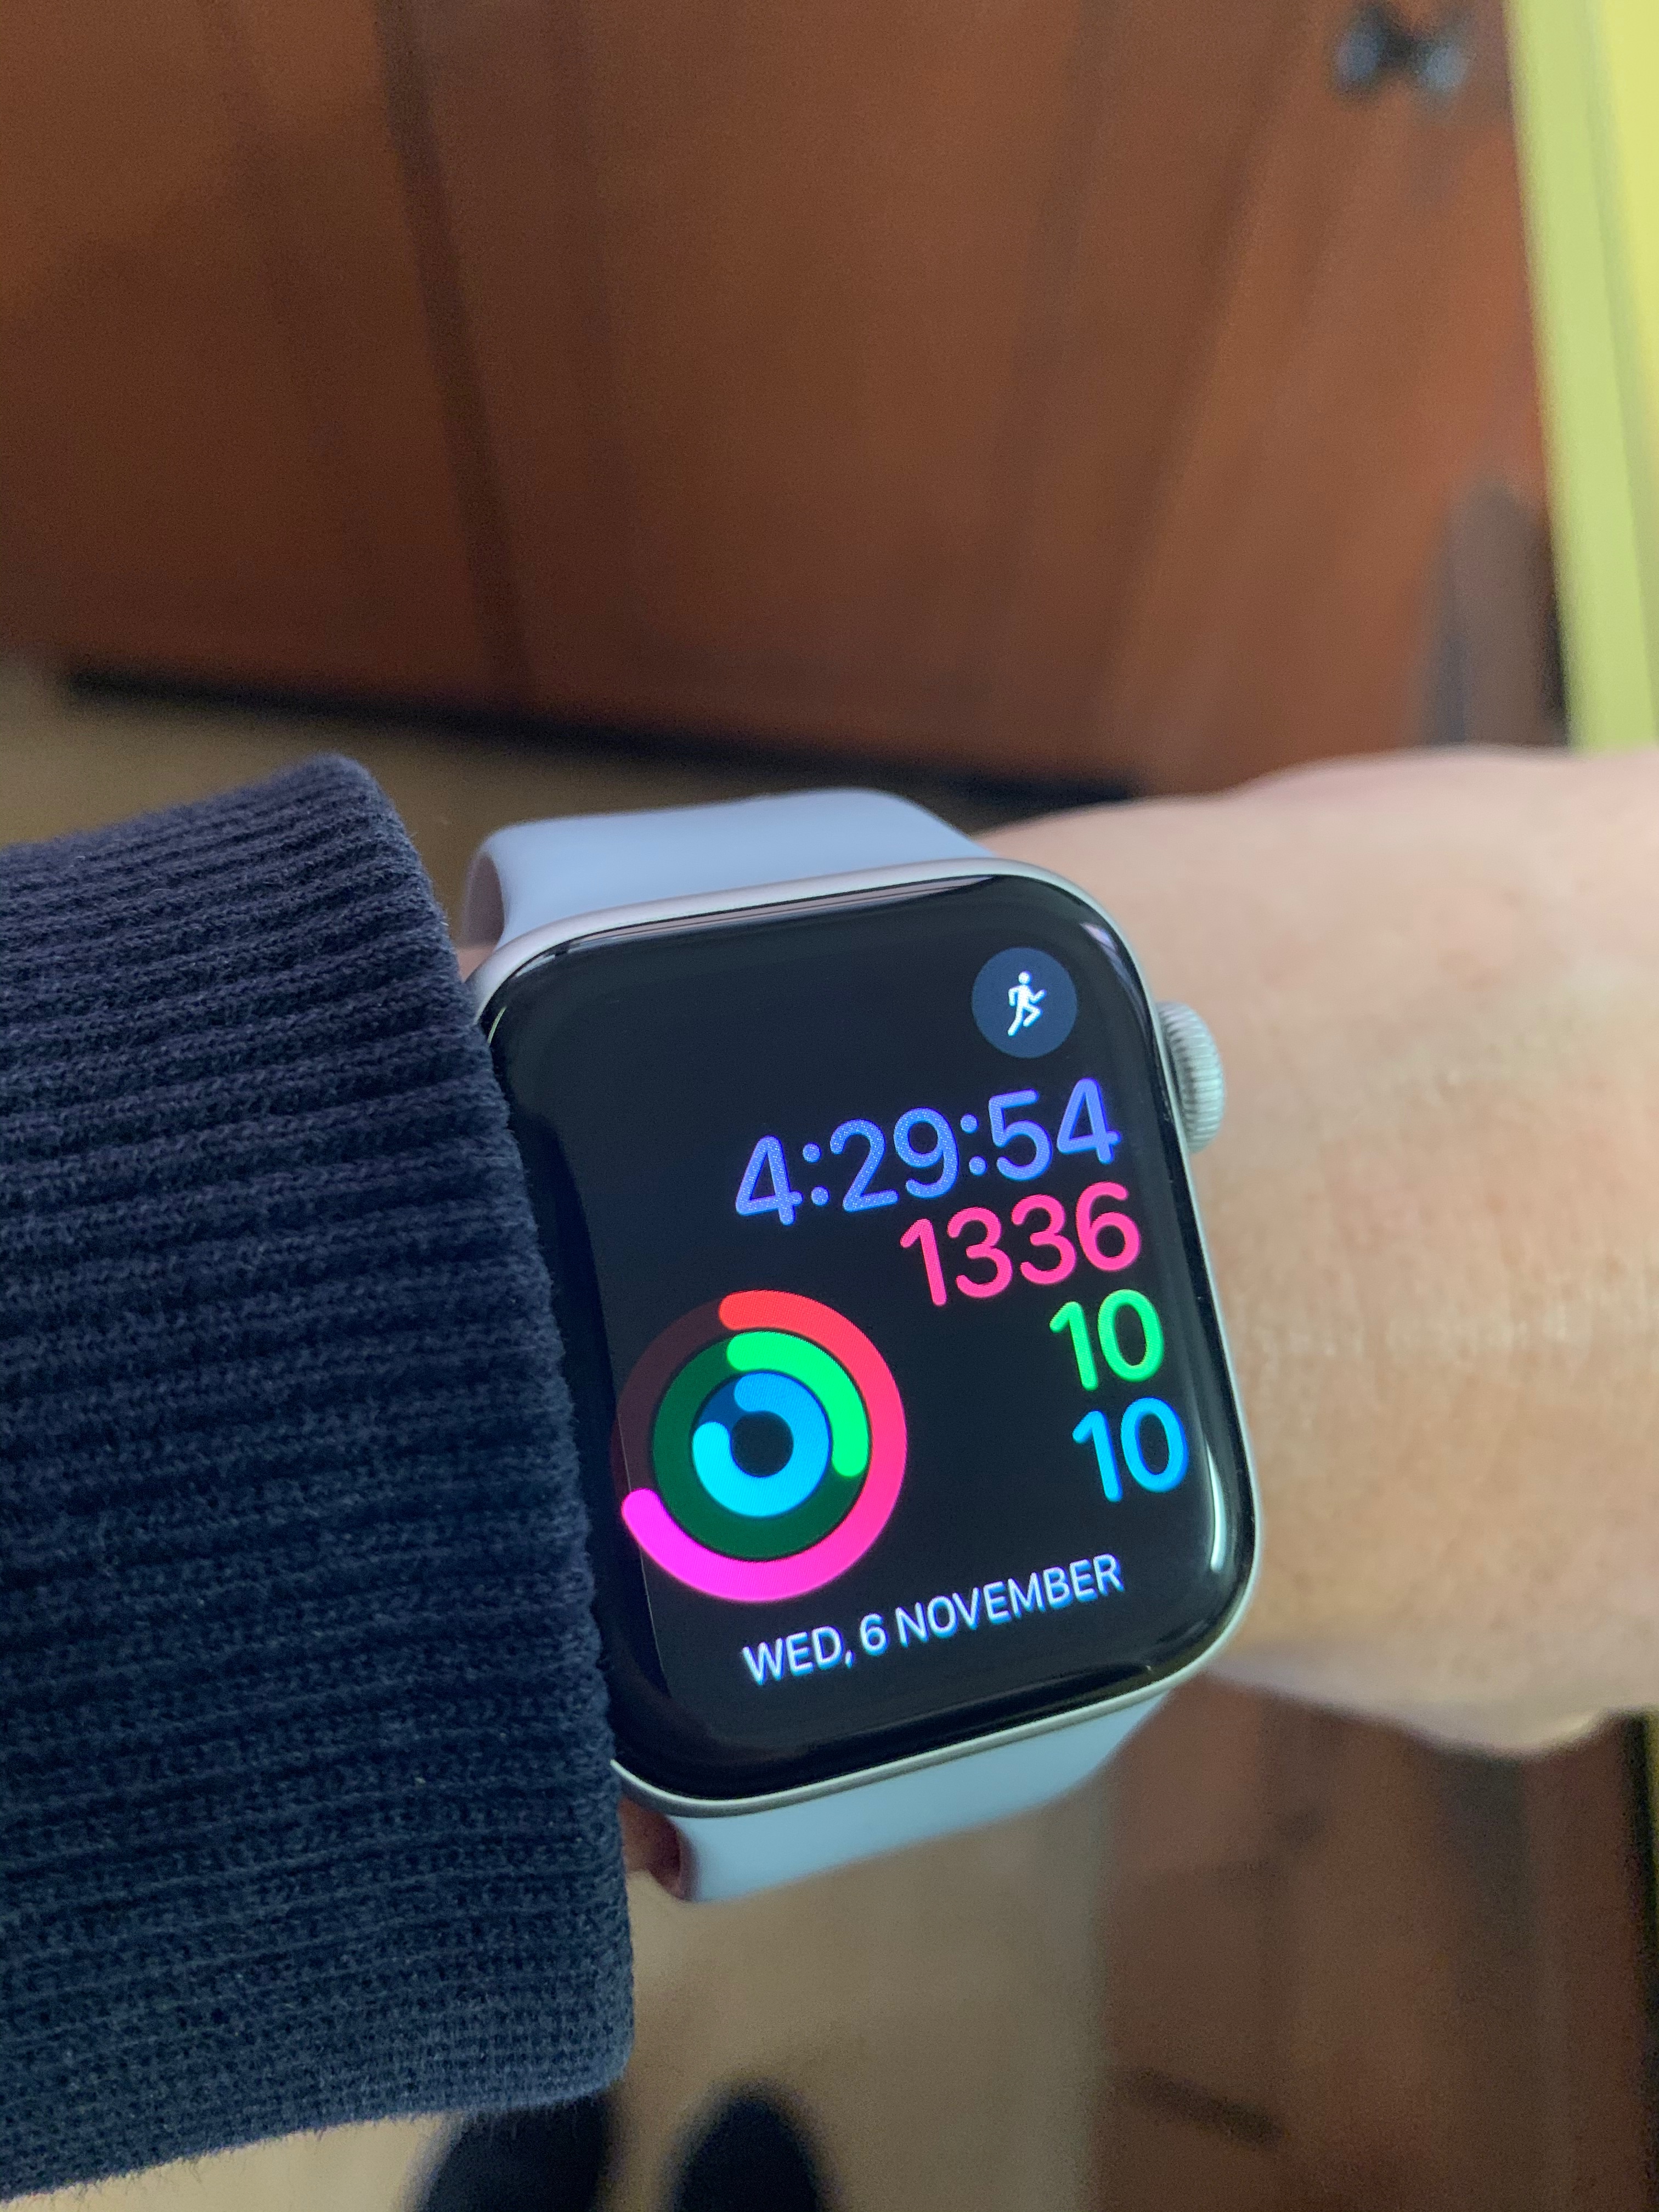 Apple Watch Series 4 Home Screen Move Cal Apple Community